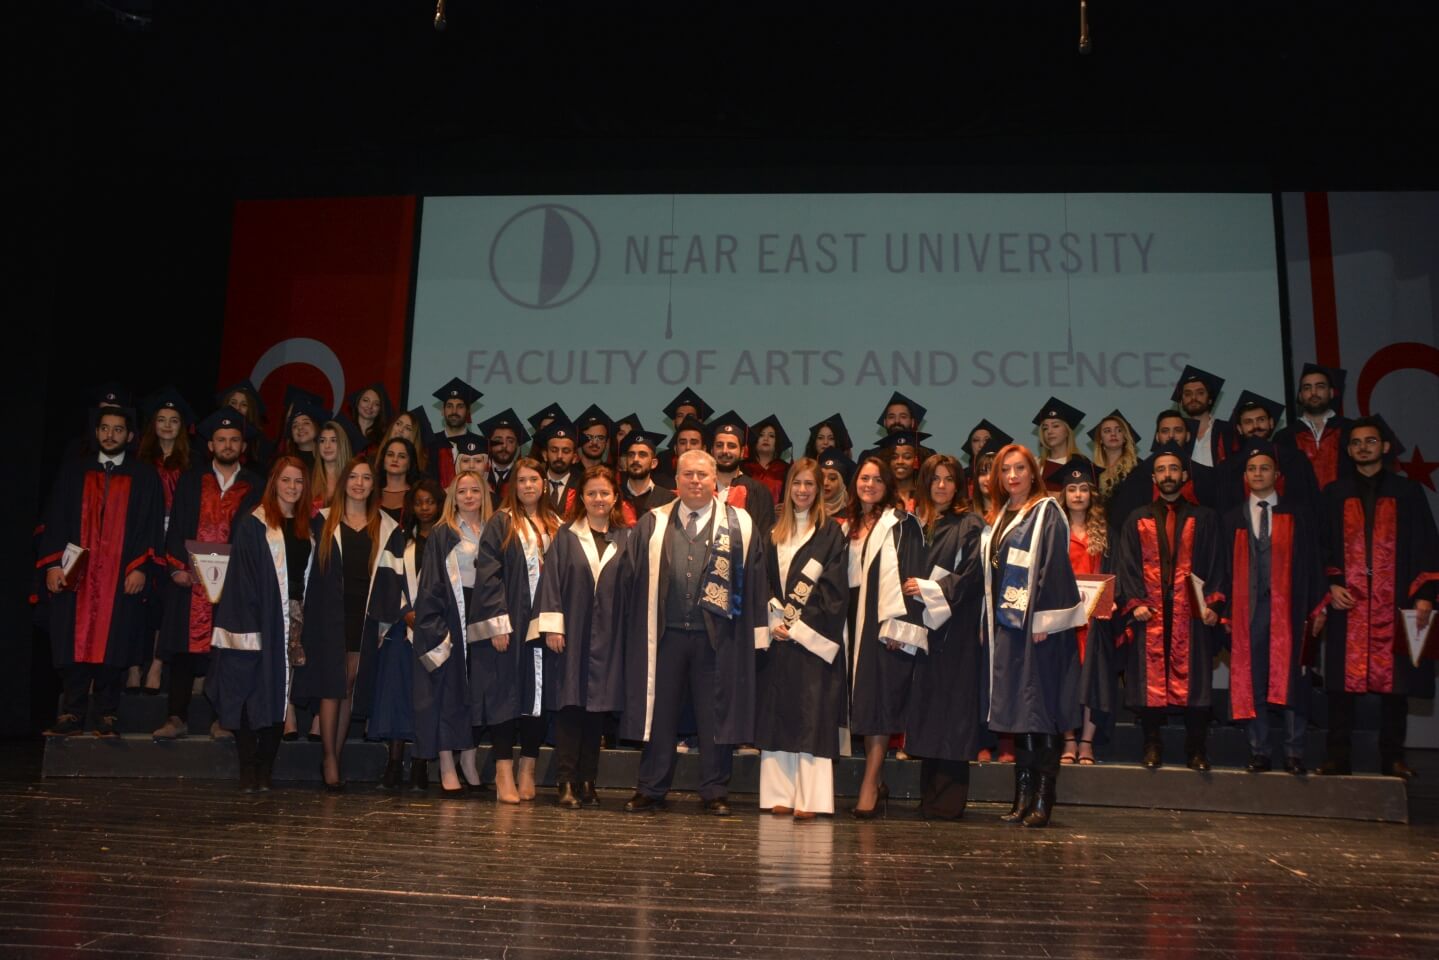 Equipped with knowledge, they were put into life… Graduation ceremony of Near East University Faculty of Arts and Sciences was held